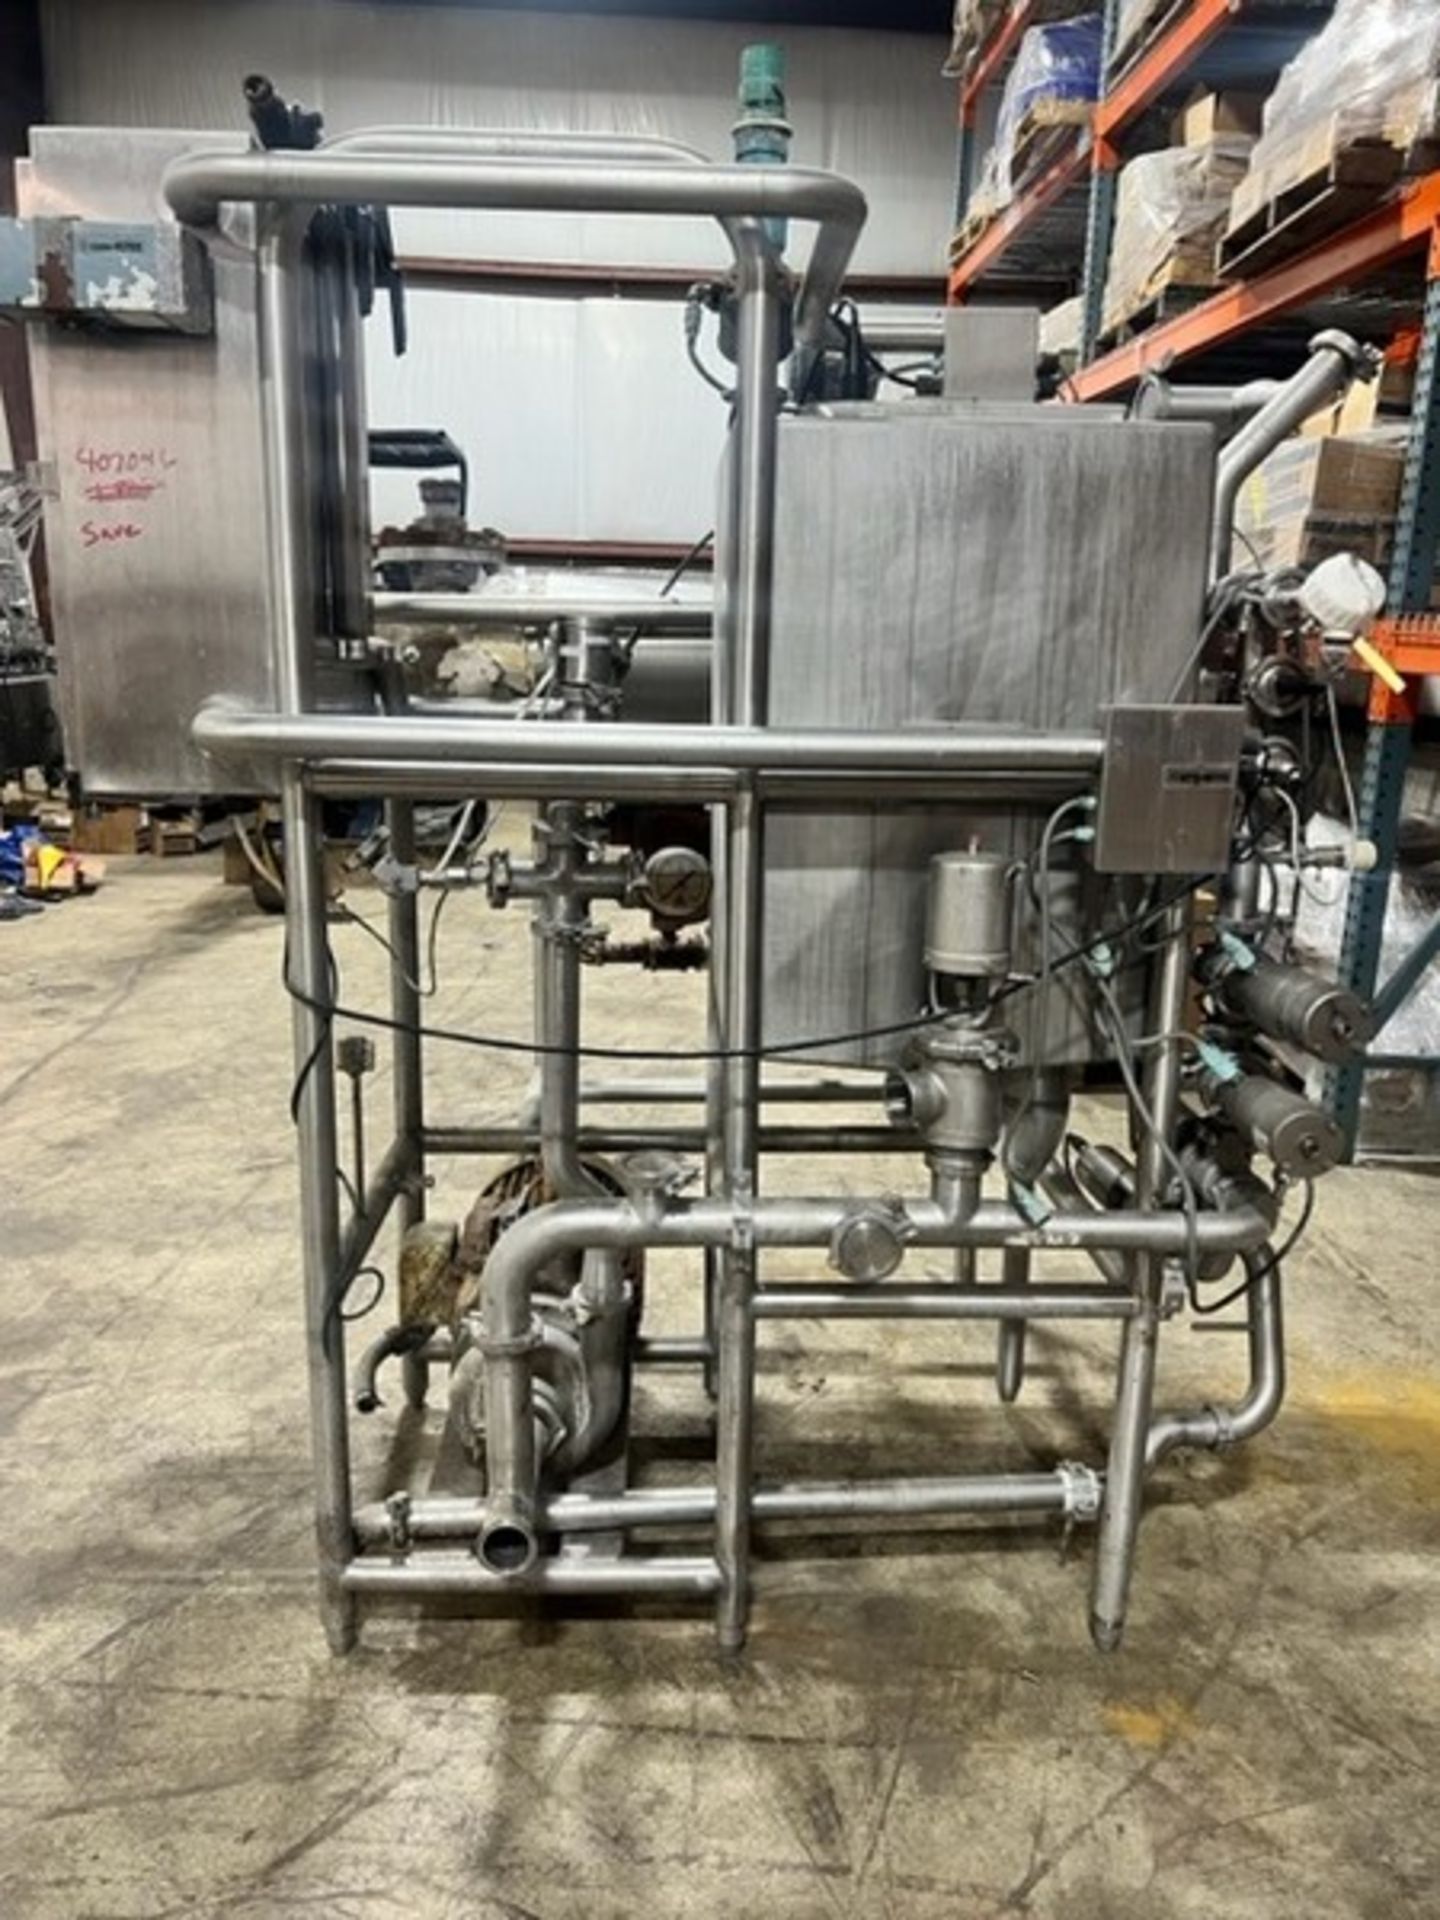 Aprox. 60 Gal. CIP Skid with Valving, Ampco 20 hp Pump - 3520 RPM, Tubular Heat Exchanger, S/S - Image 2 of 9